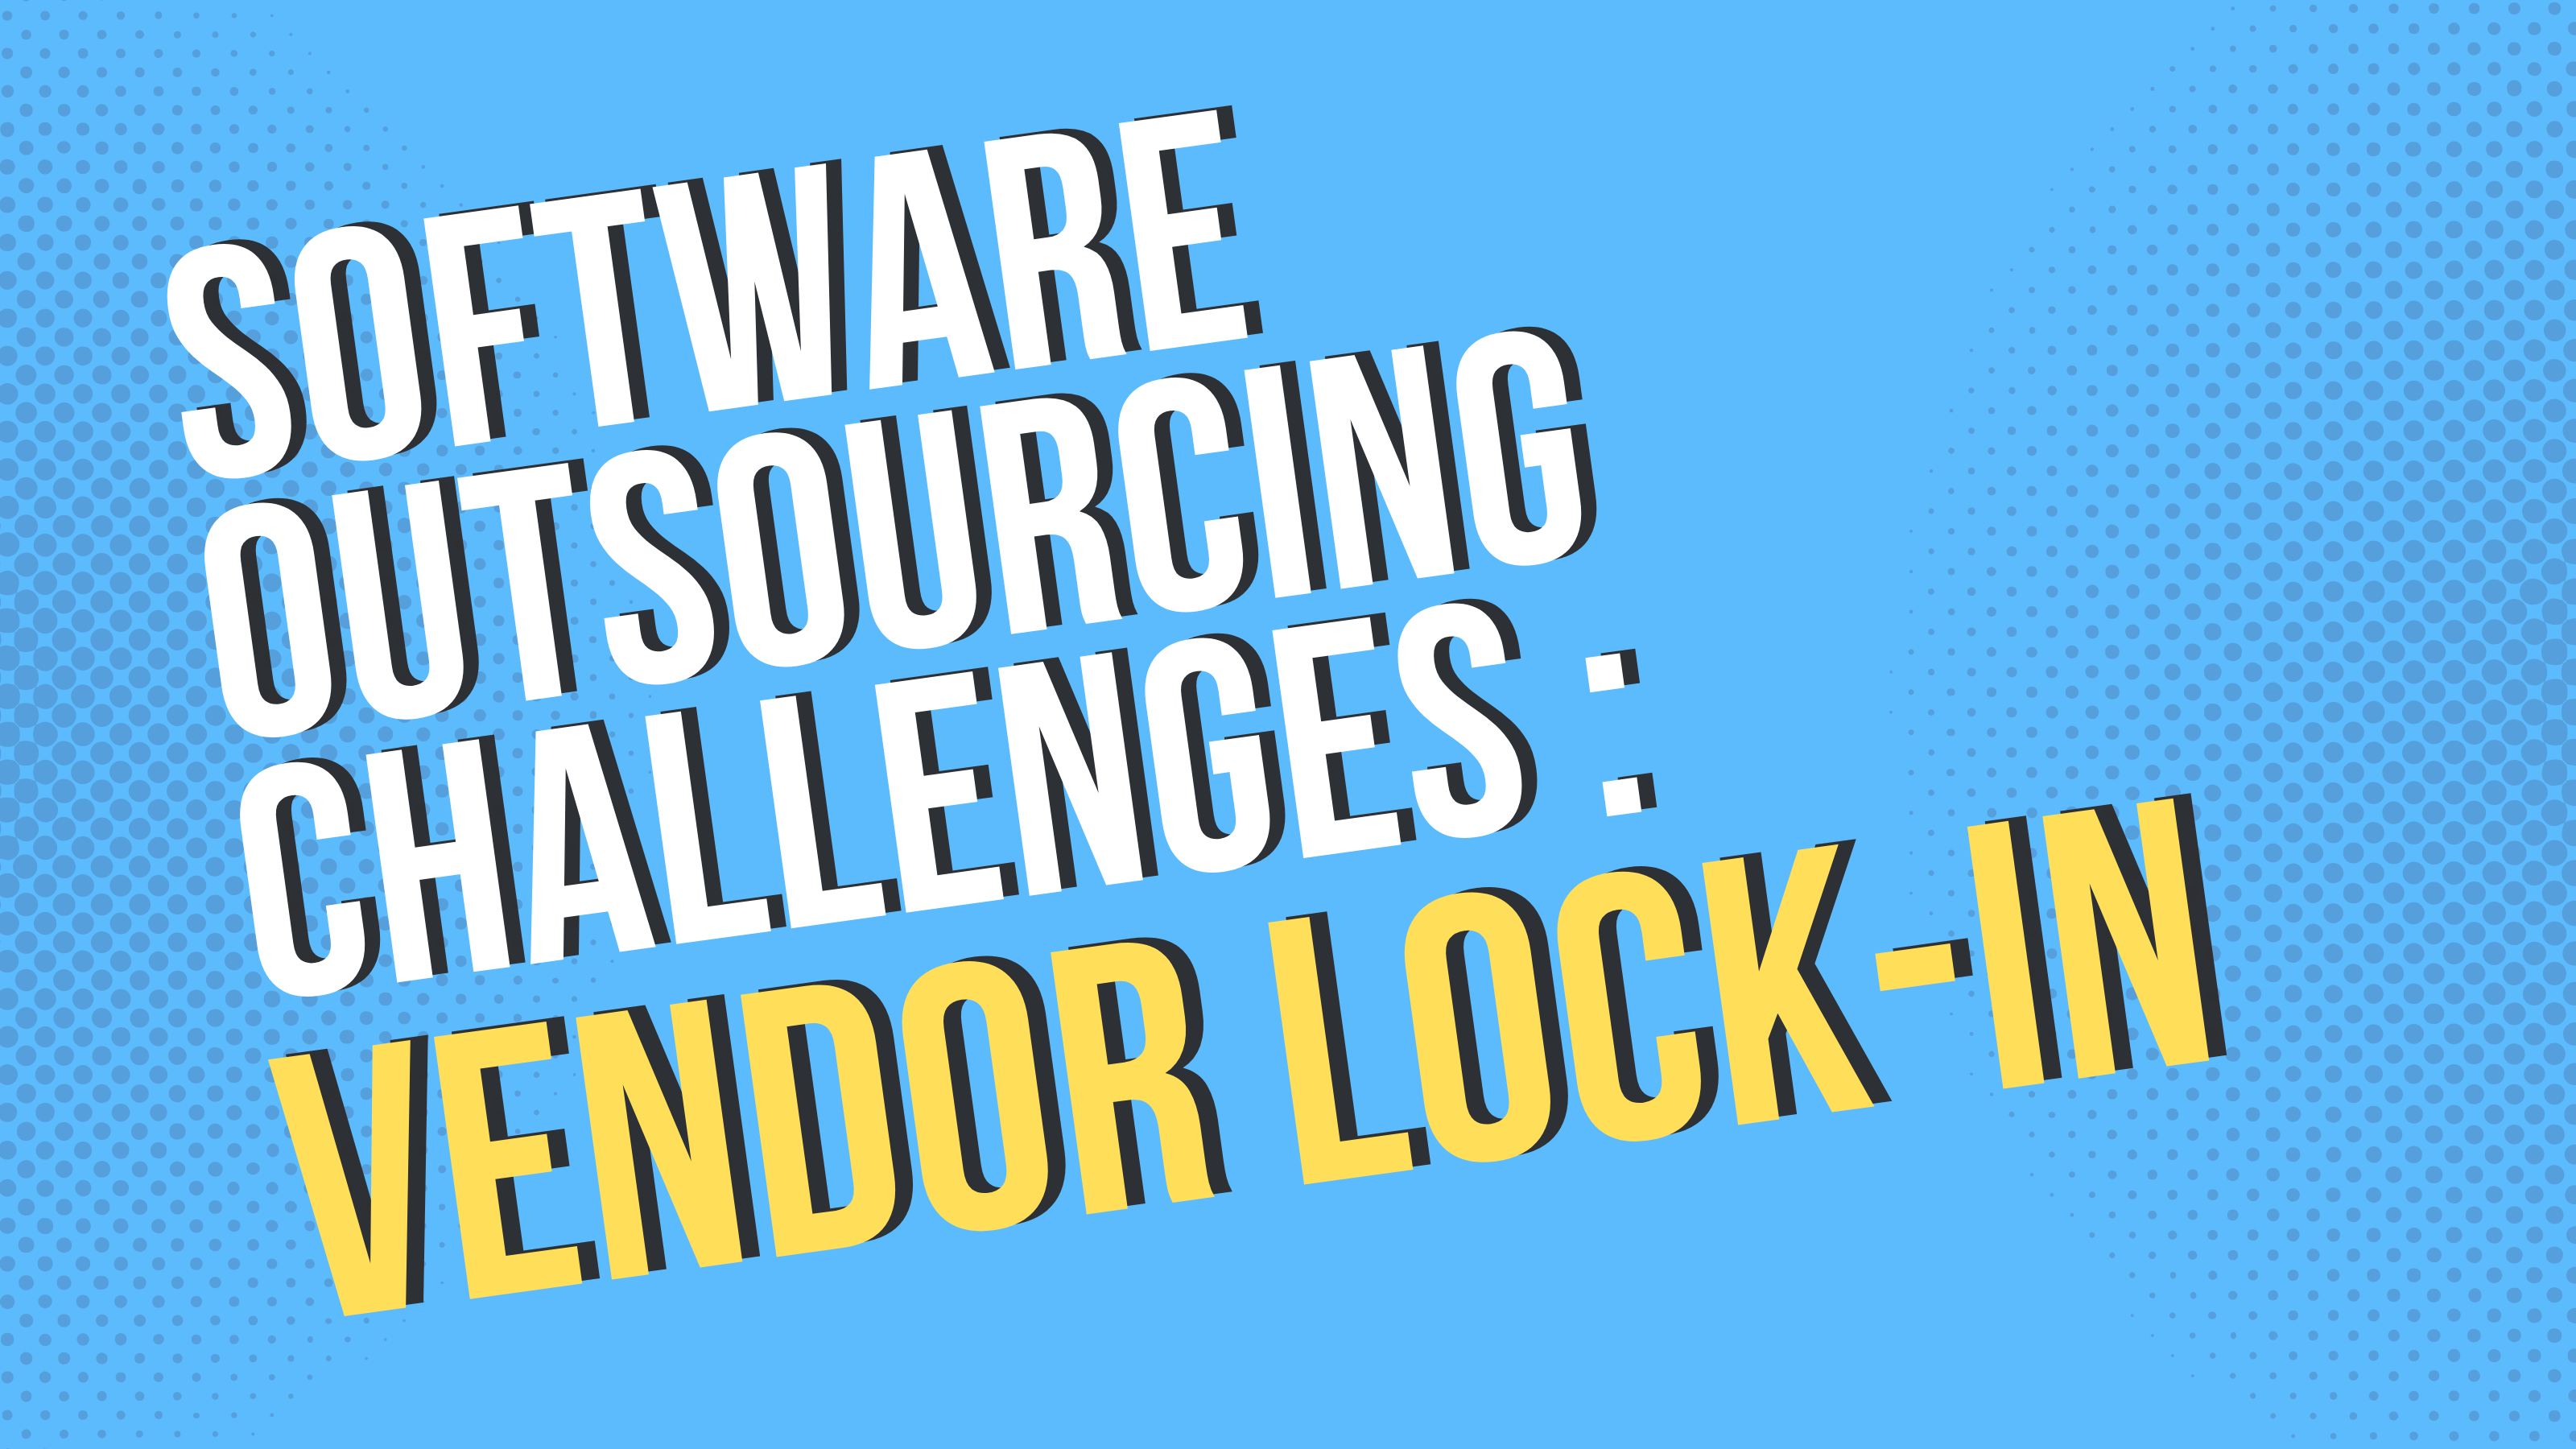 Software Outsourcing Challenges: Vendor Lock-in